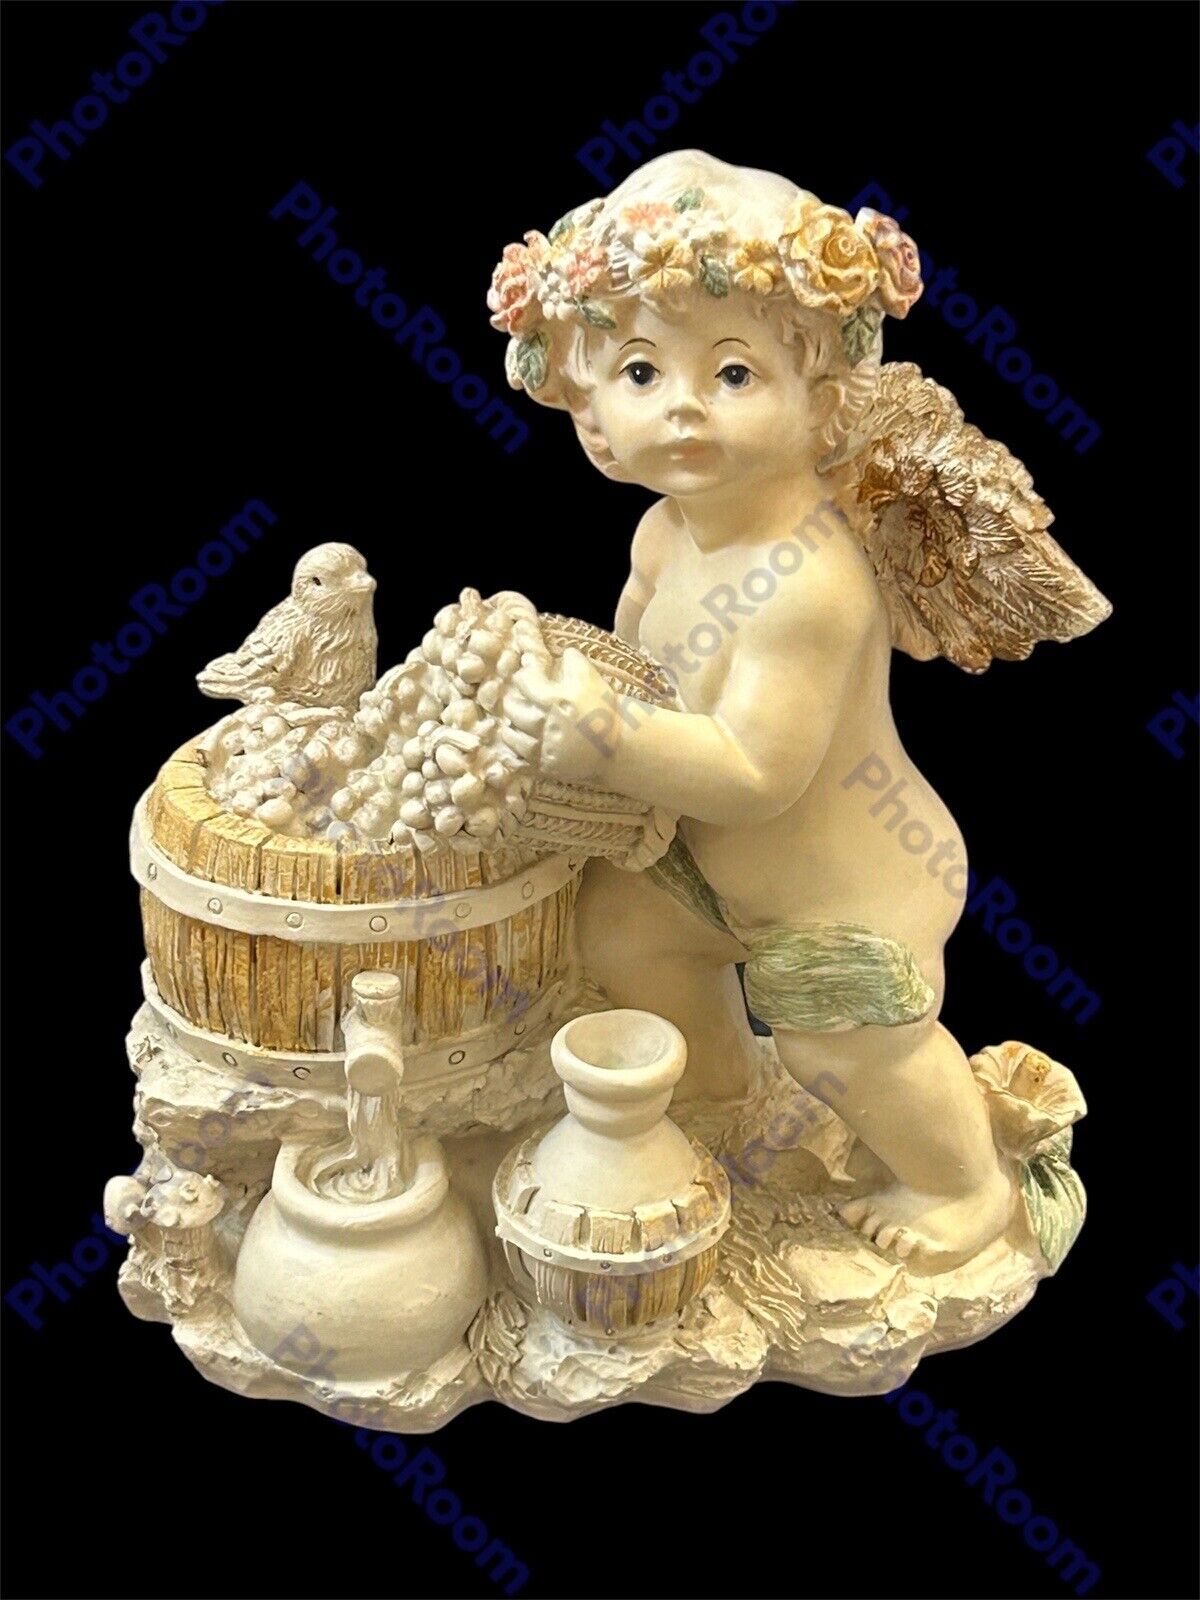 ANTIQUE BISQUE PORCELAIN CHERAB/ ANGEL PALE COLORS ABSOLUTELY EXQUISITE 5 In